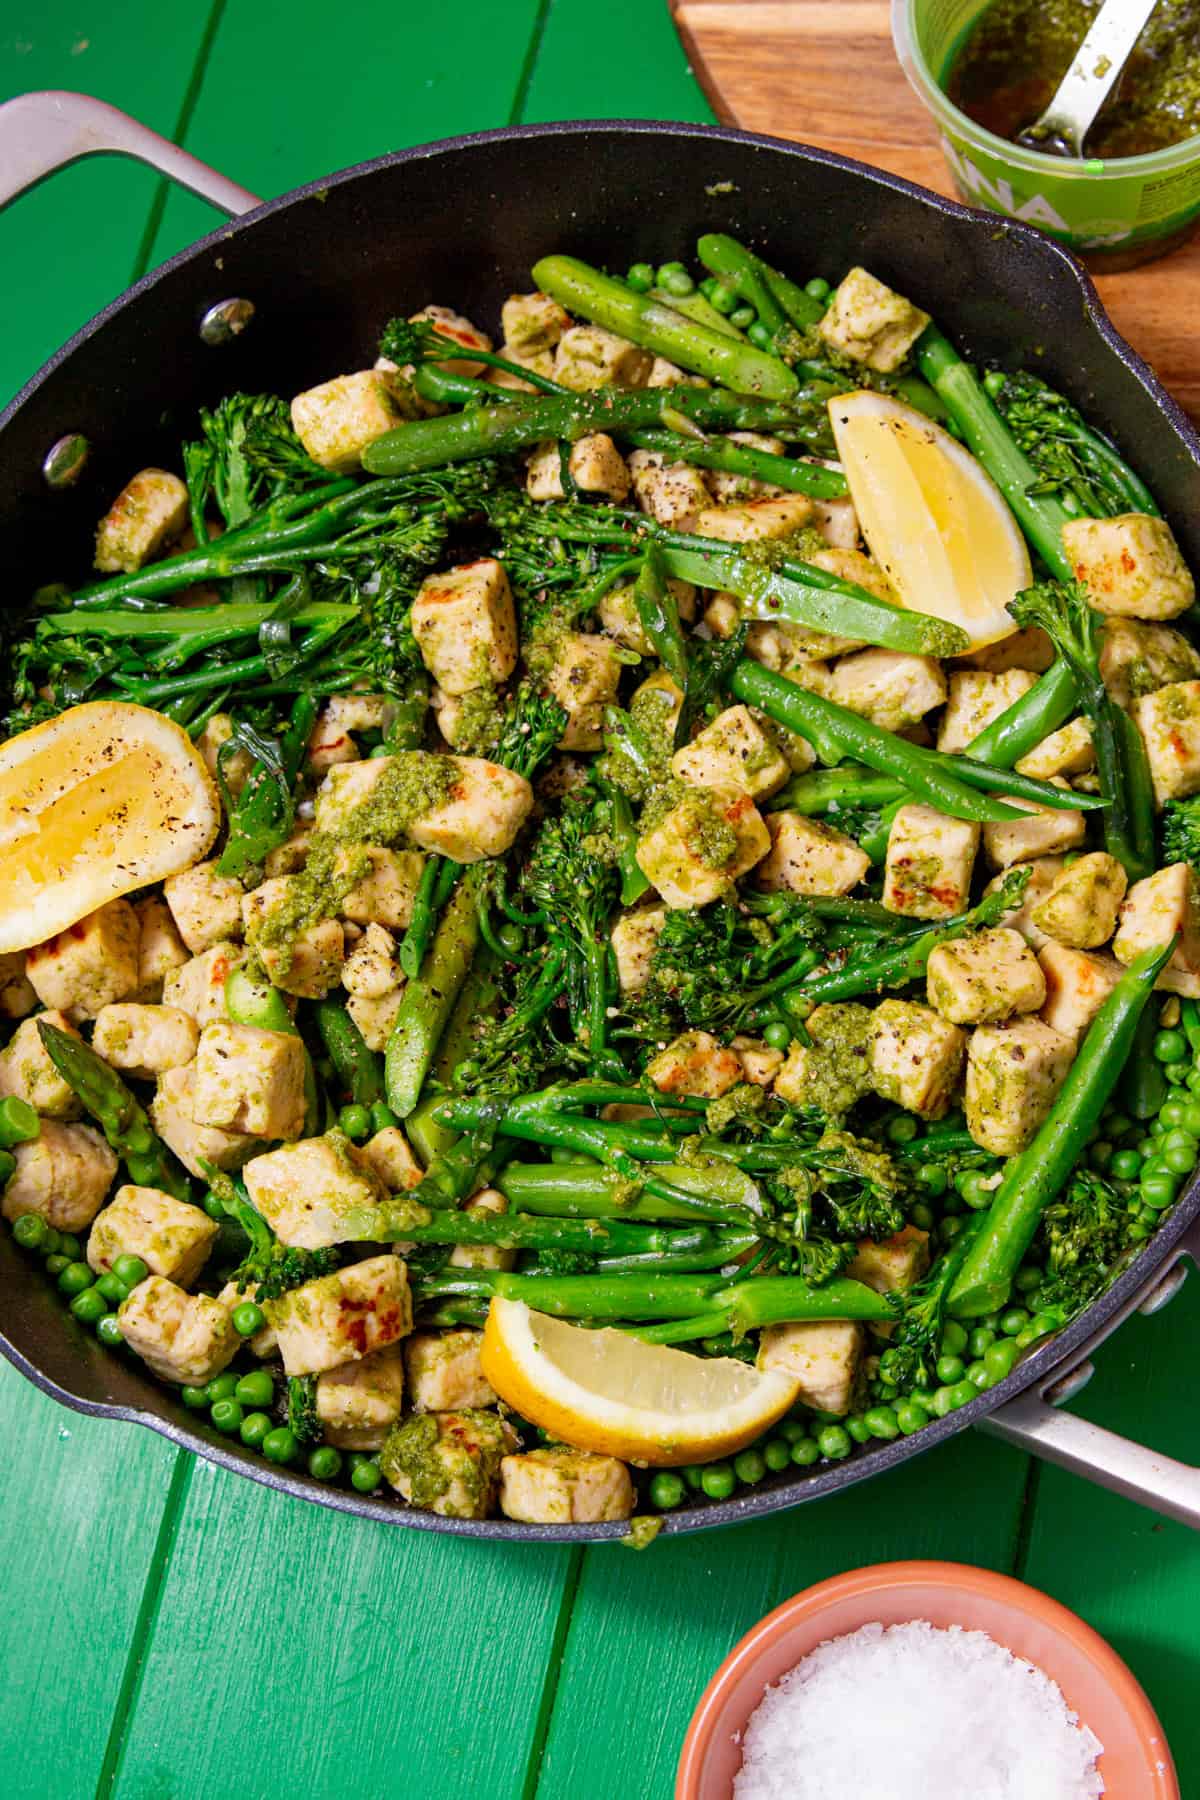 A large pan with Quorn pieces, broccoli, asparagus and peas with some lemon wedges and a green sauce.